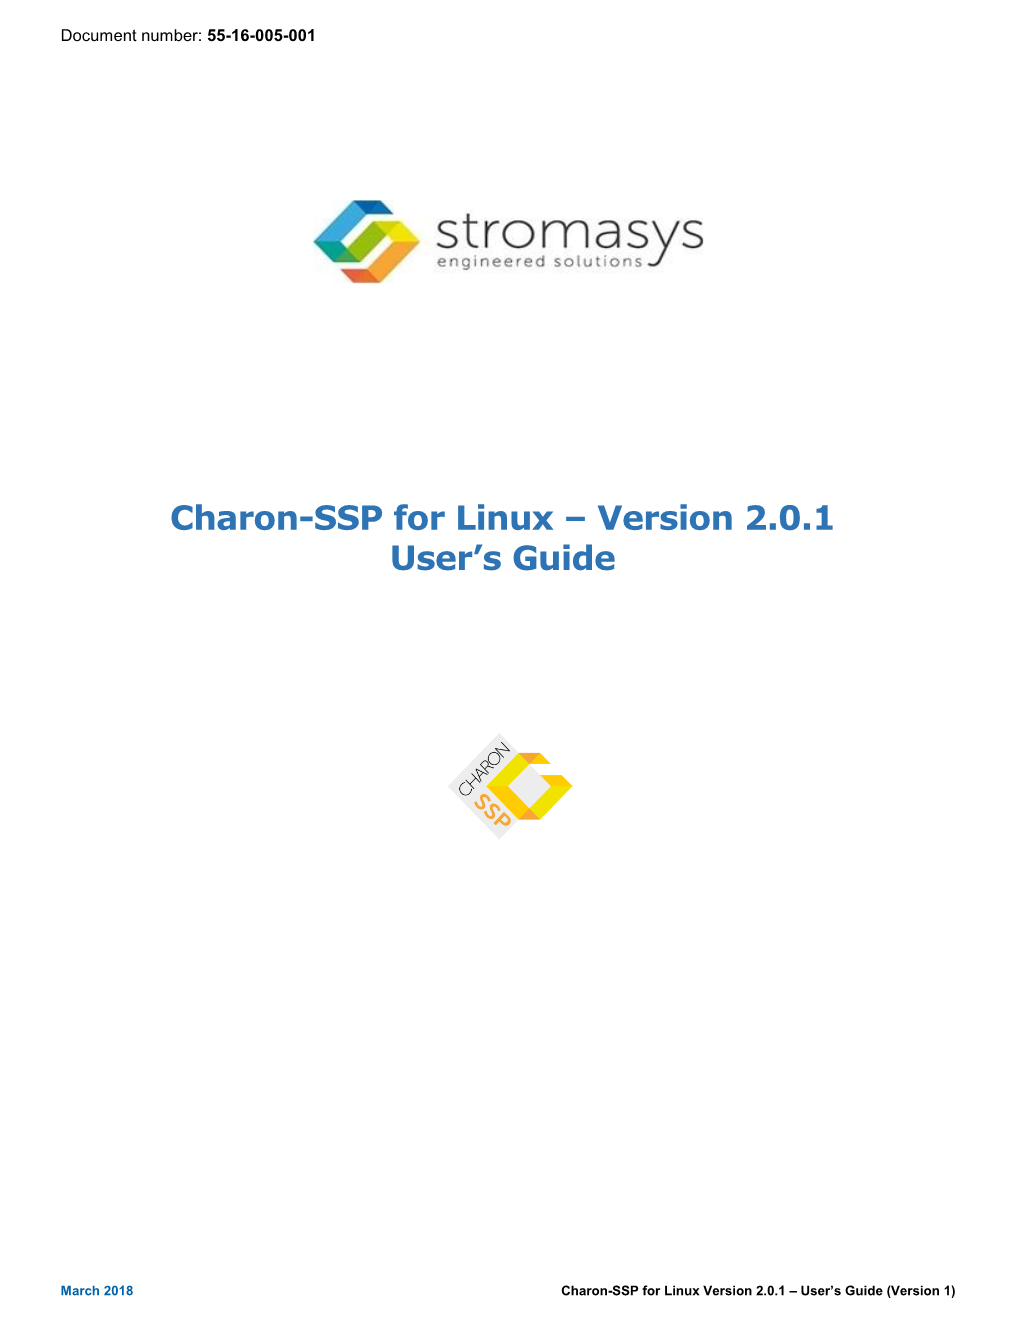 Charon-SSP for Linux – Version 2.0.1 User's Guide